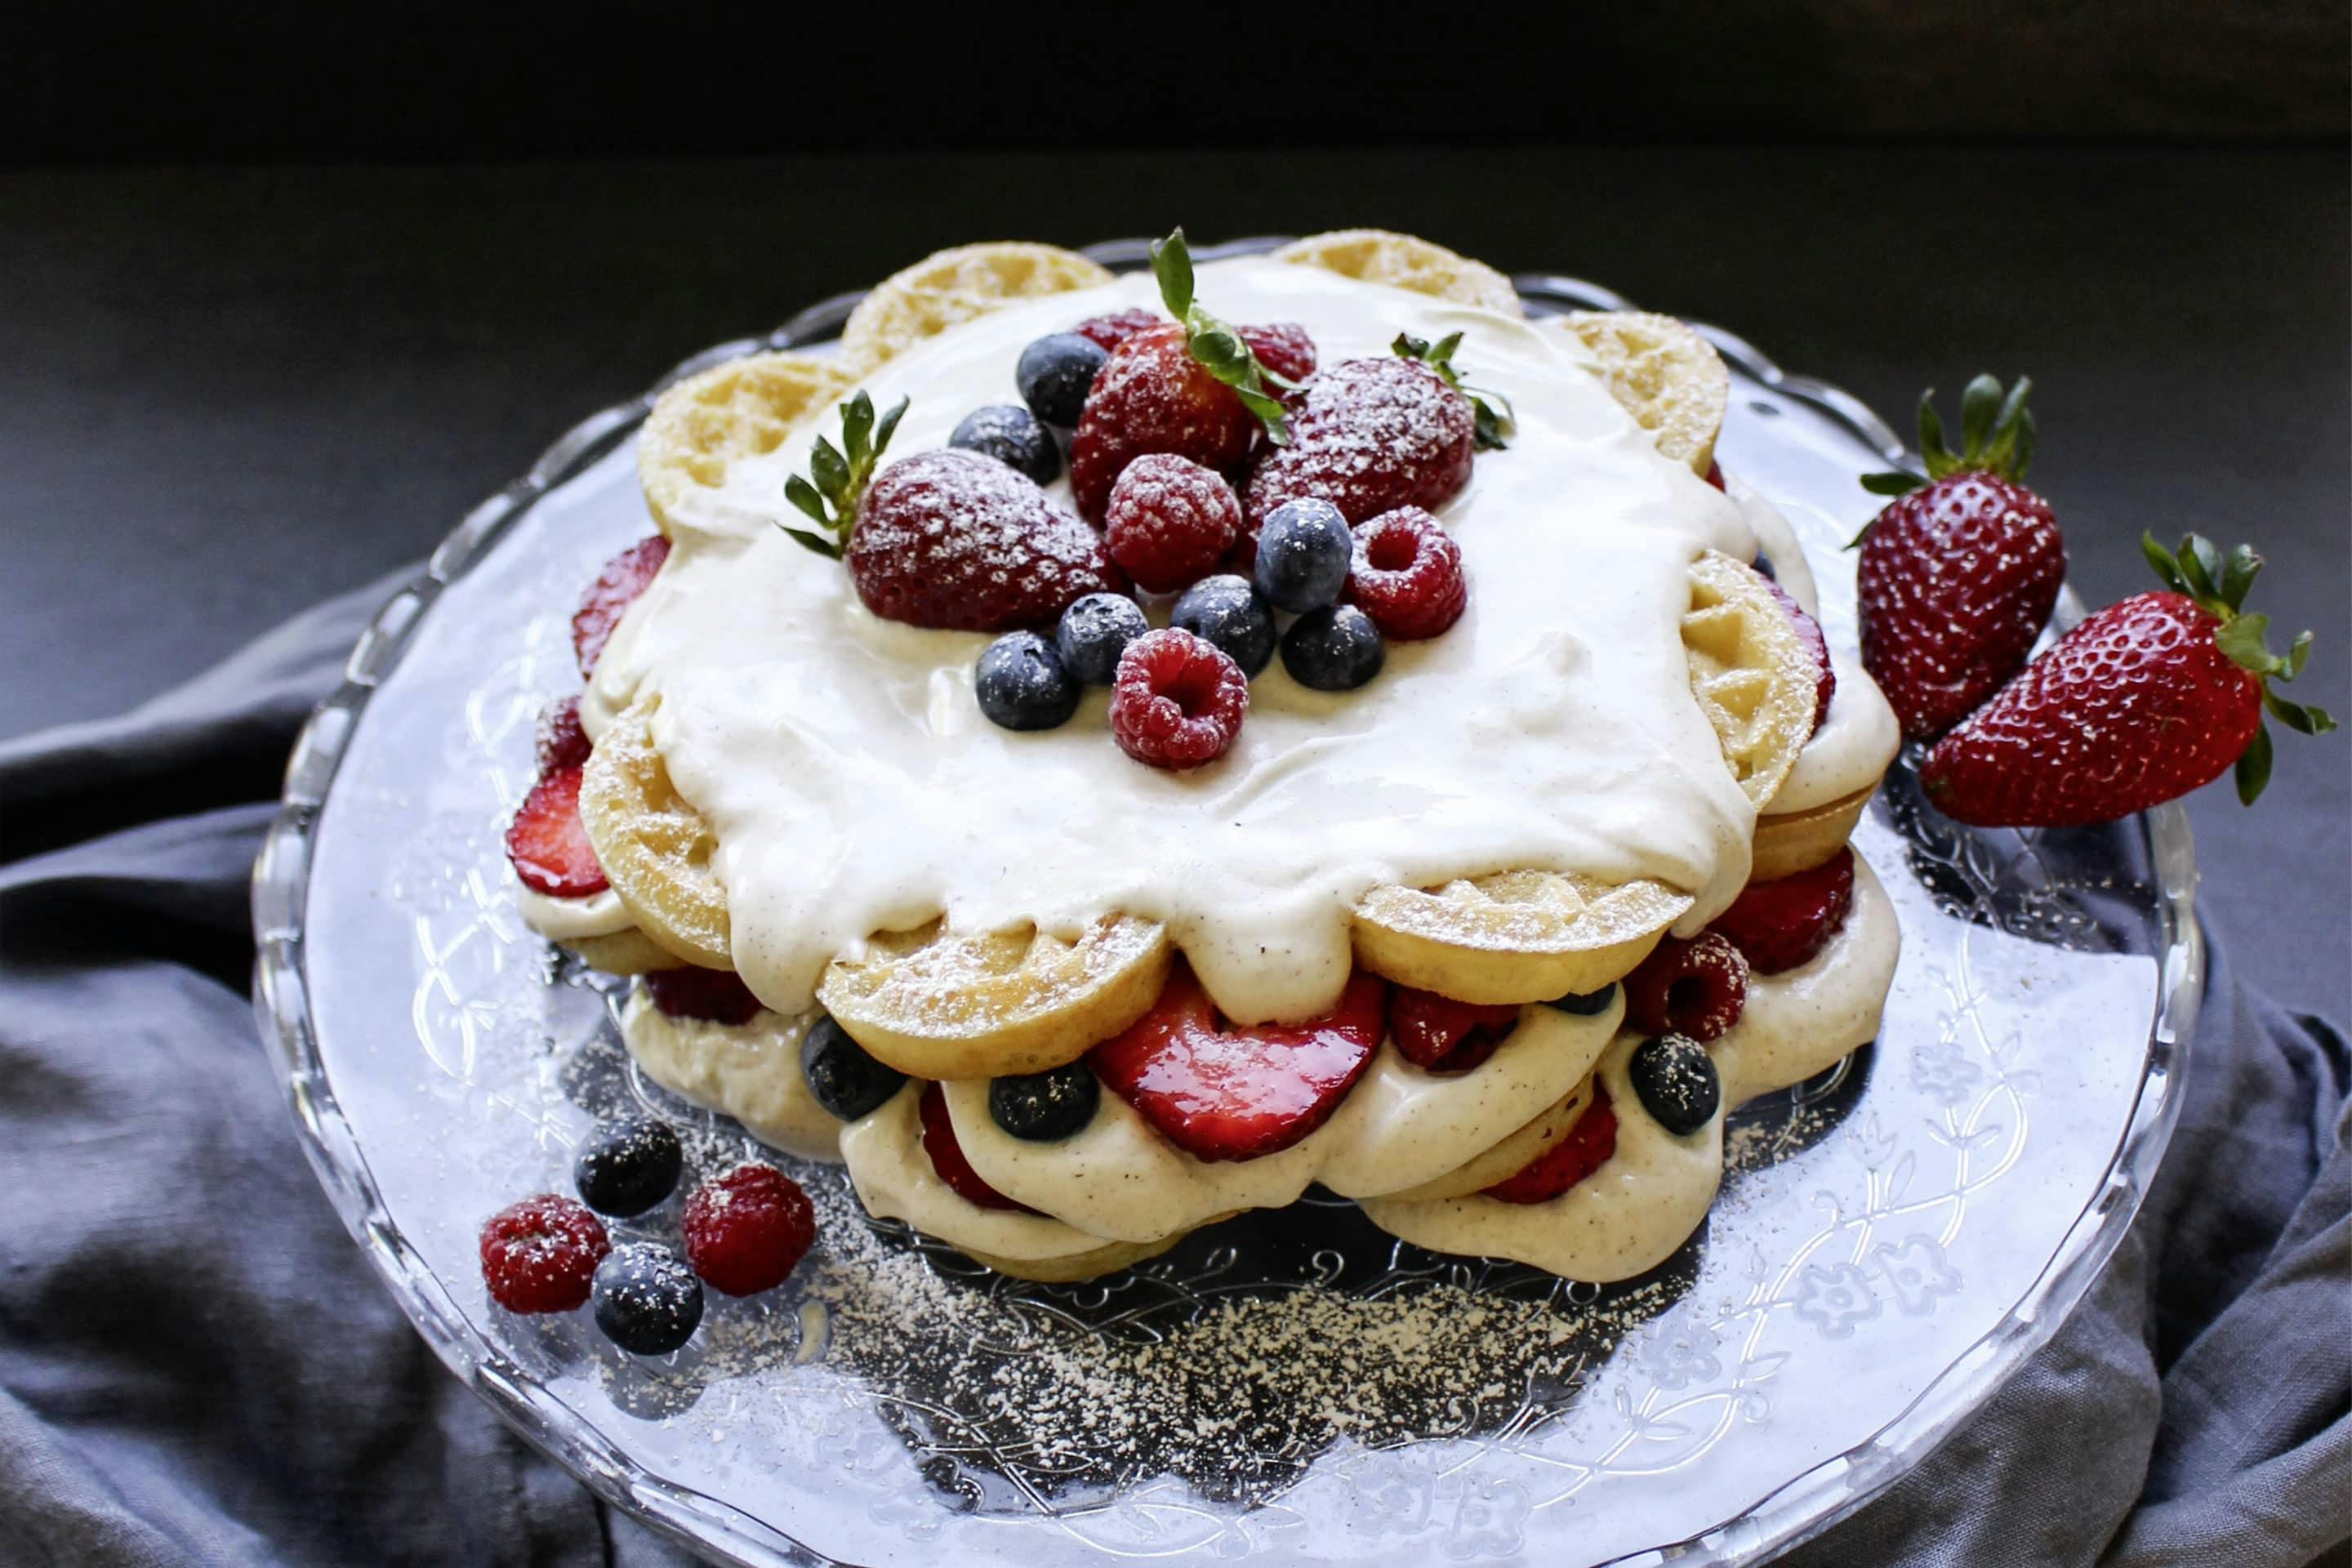 Wafflecake with fresh berries on a glass cake stand